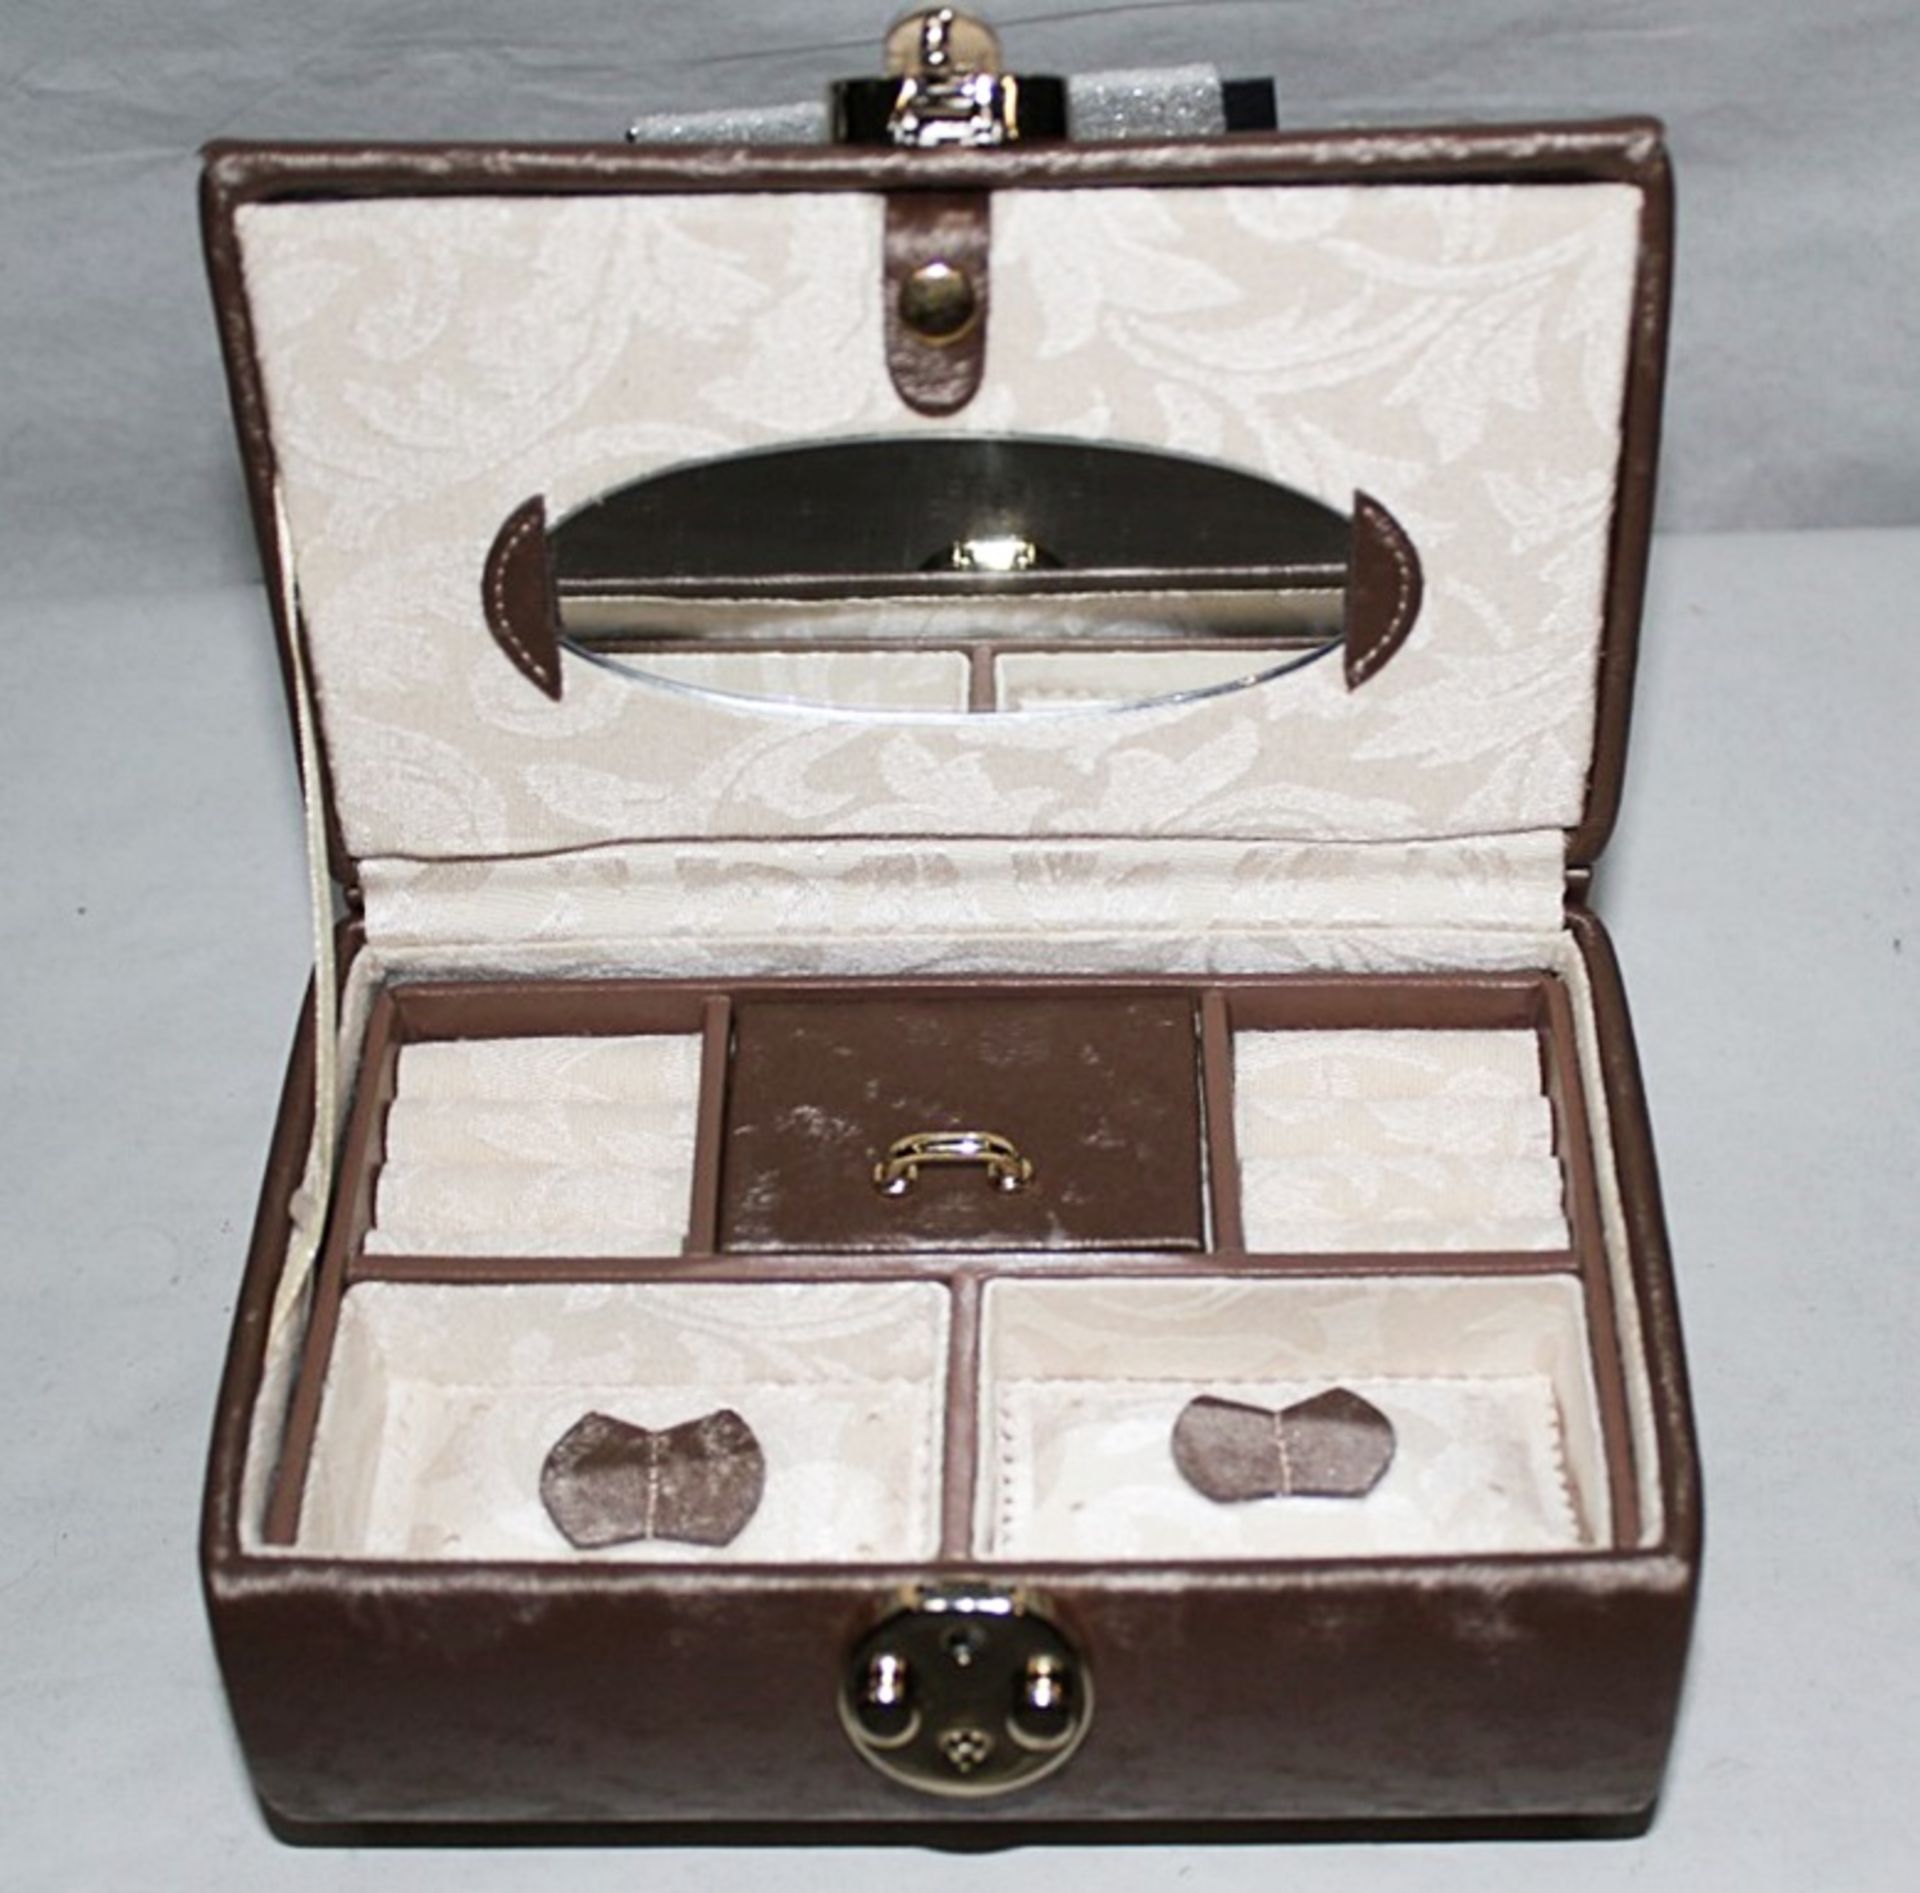 1 x "AB Collezioni" Italian Luxury Jewellery Box (33546) - Ref LT140 – Features A Pull-Out - Image 3 of 5